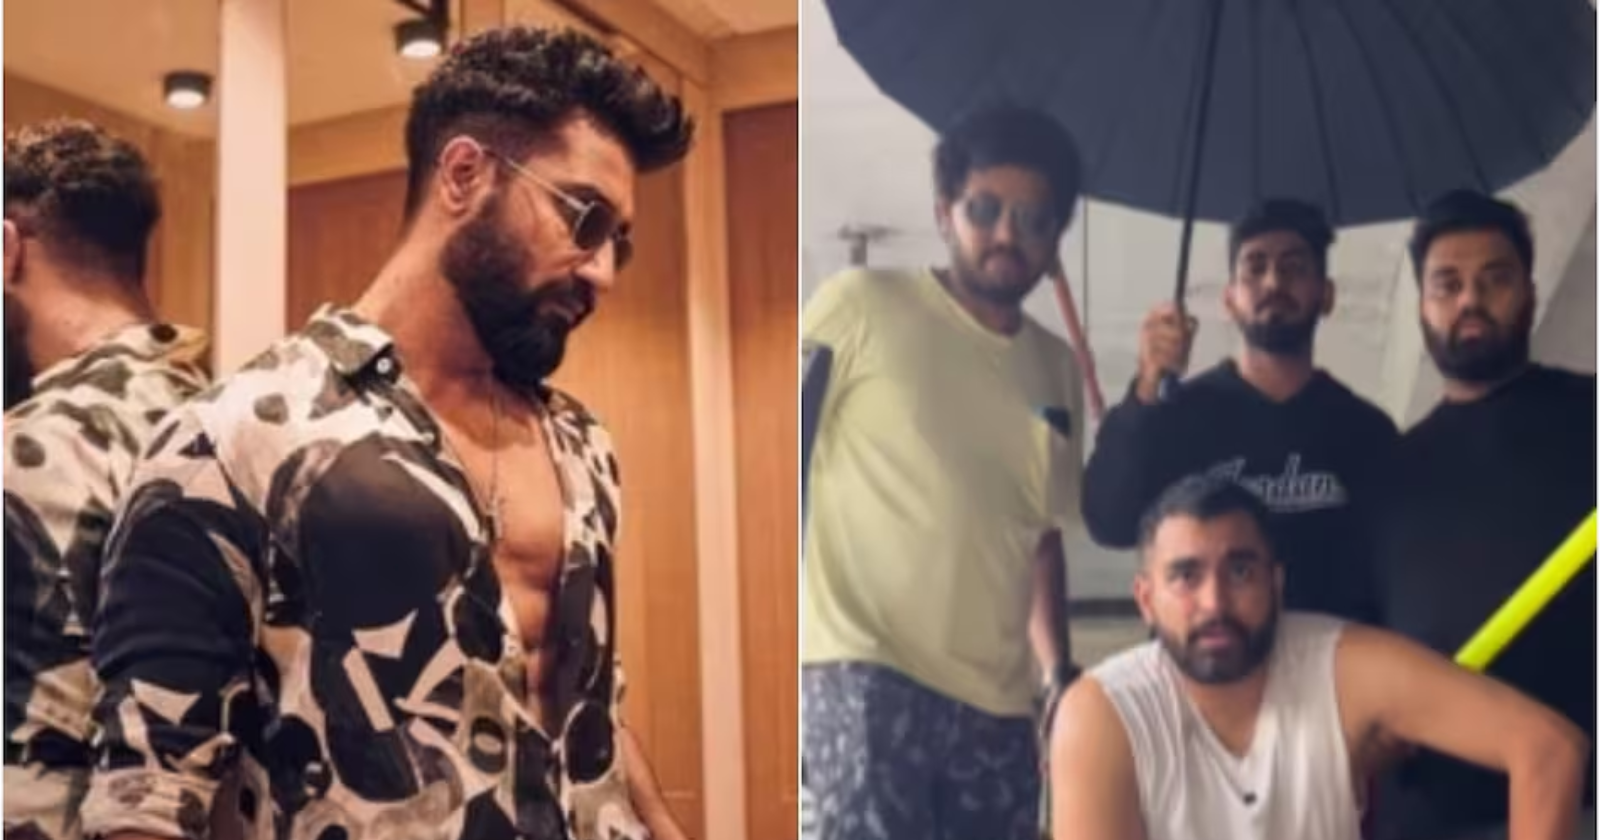 Instagram Influencers039 Rants About Vicky Kaushal039s Dance Steps In Tauba